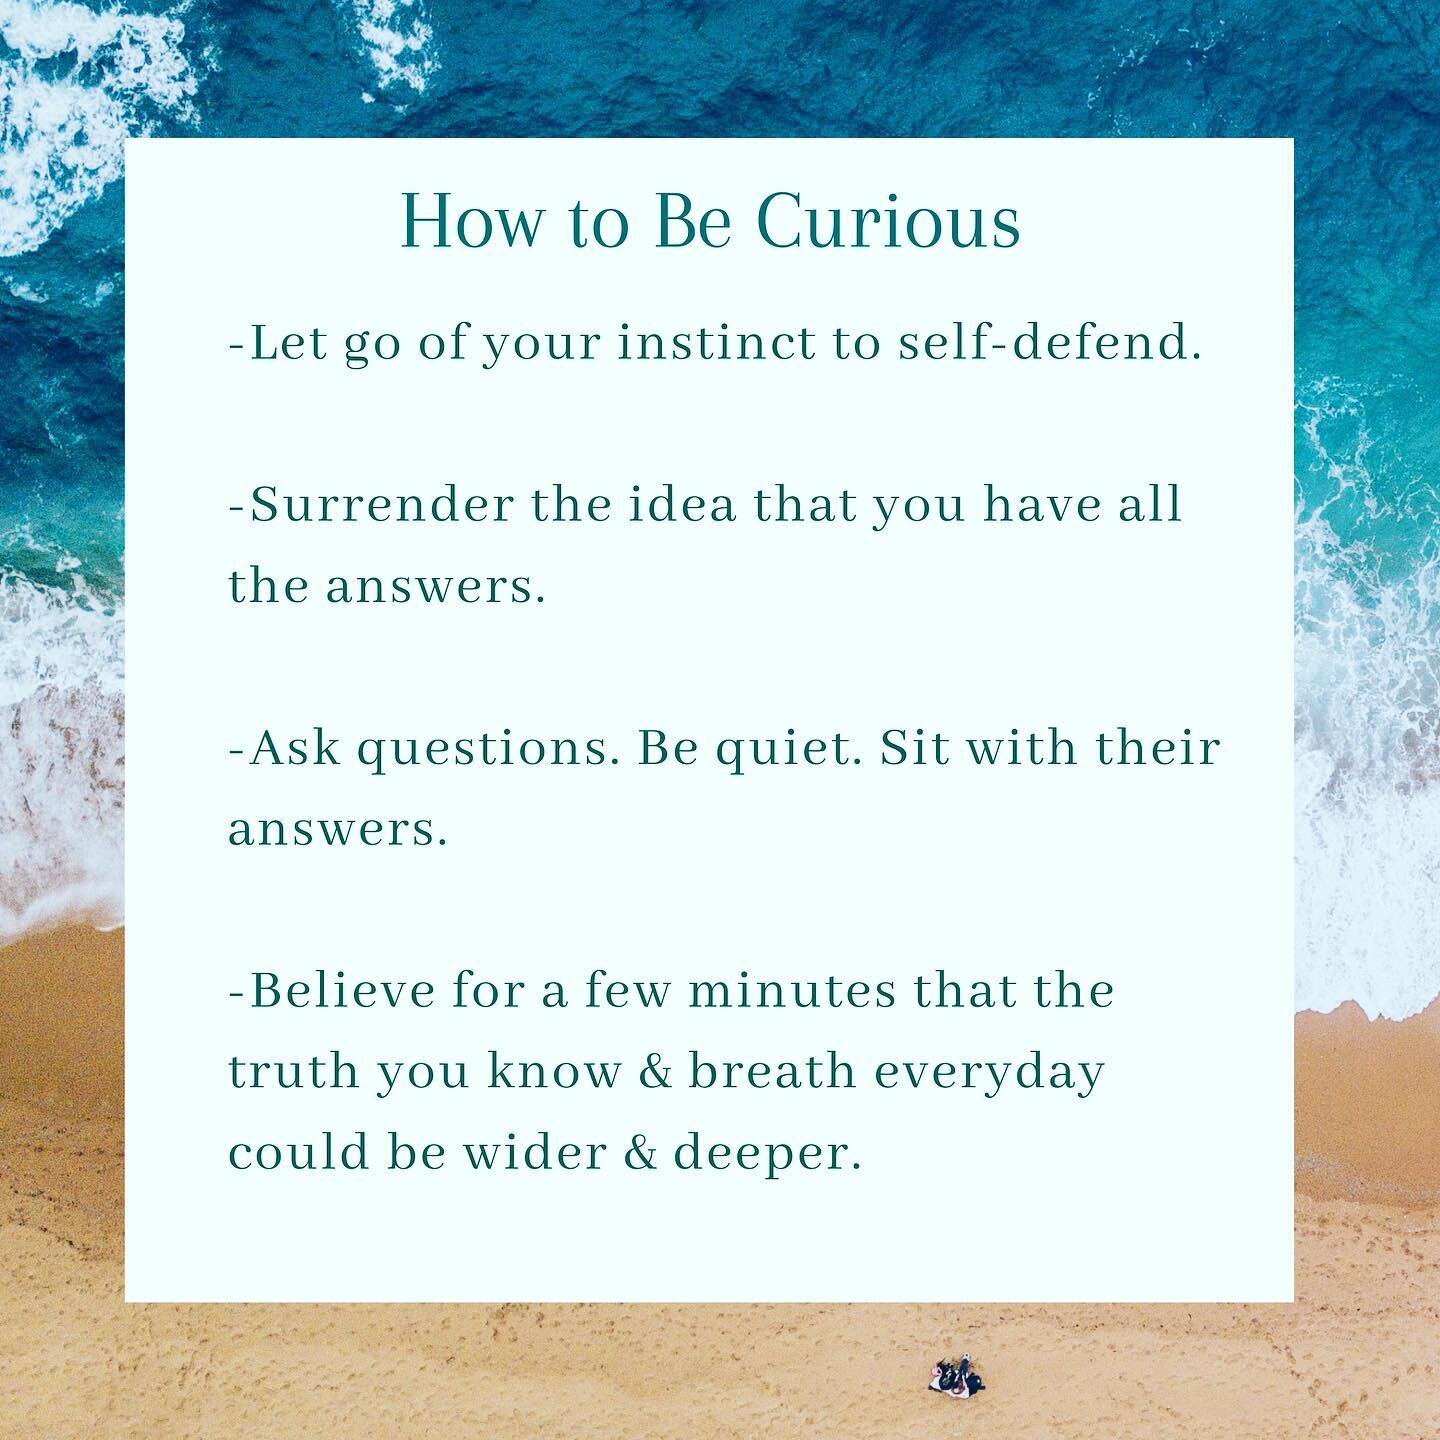 Curiosity is key to any good conversation. #therapist #therapy #mentalhealth #mentalhealthawareness #selfcare #counseling #anxiety #selflove #health #psychotherapy #wellness #counselor #mentalhealthmatters #therapistsofinstagram #love #mindfulness #c